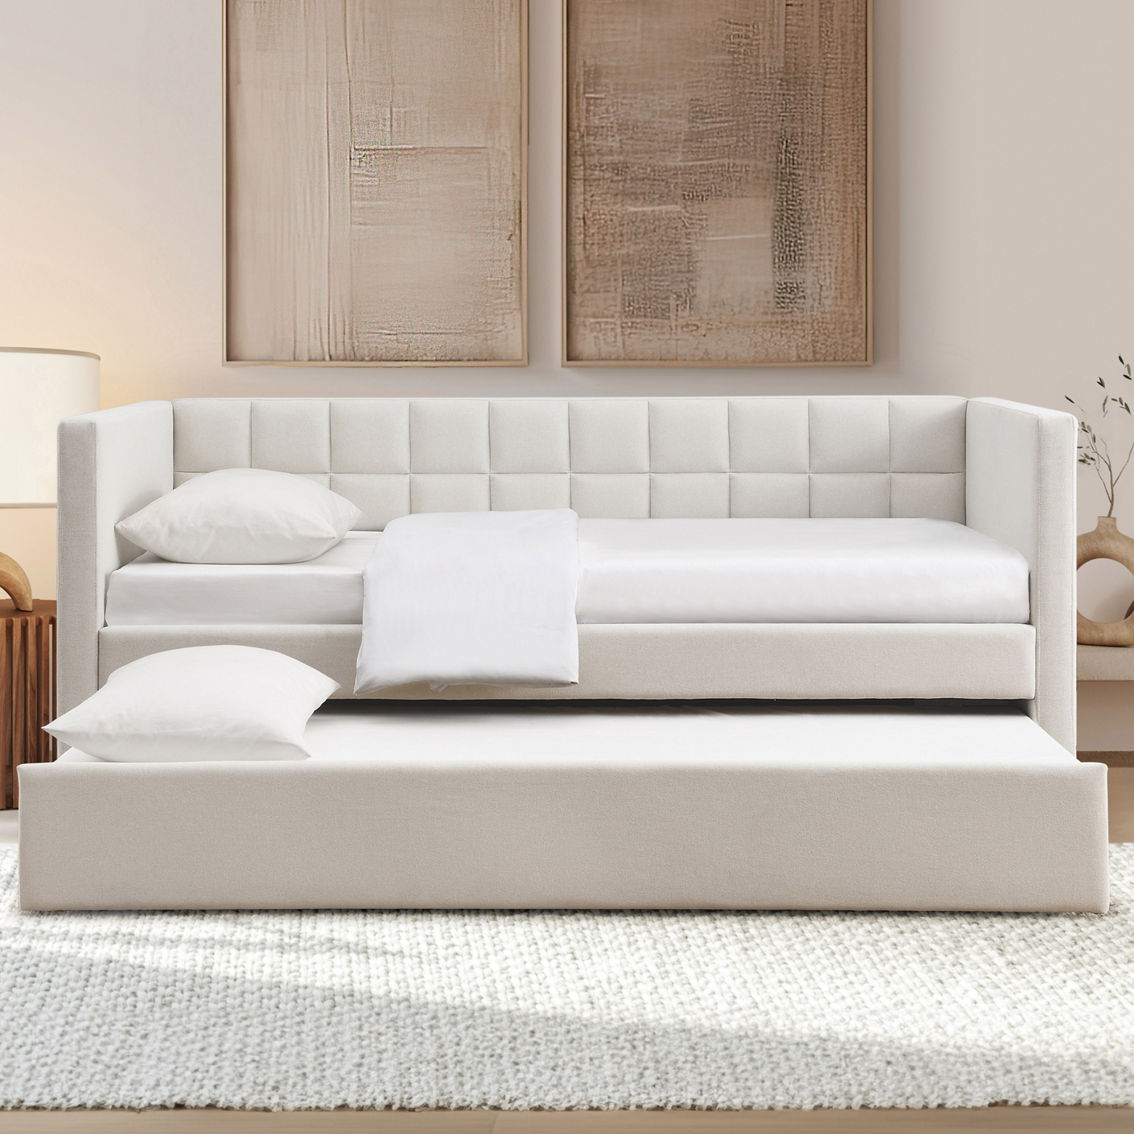 Abbyson Aveline Upholstered Twin Daybed with Trundle - Image 3 of 8